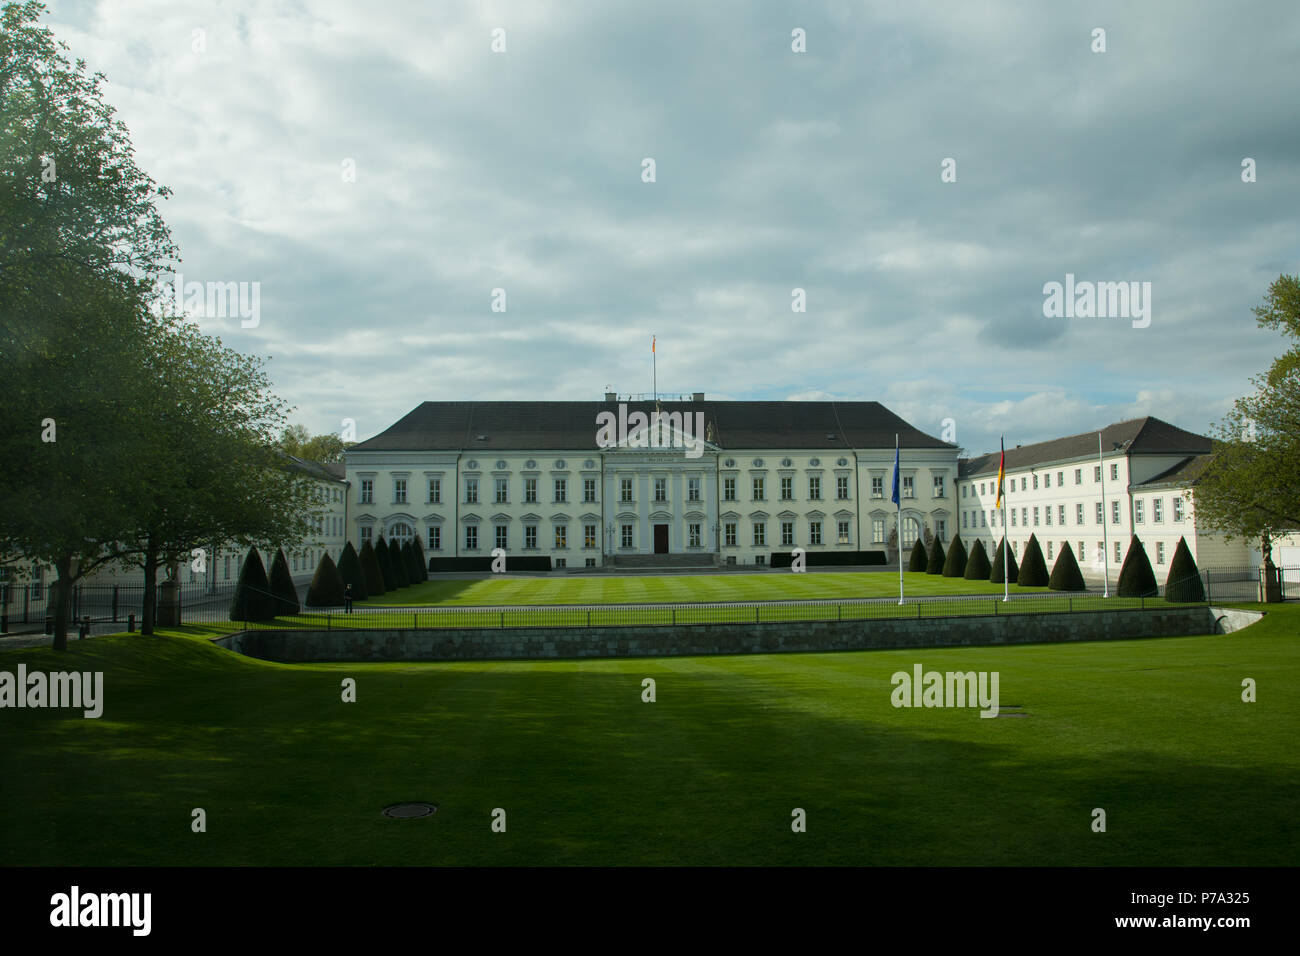 Schloss Bellevue, or Bellevue Palace, Berlin, the official residence of the German President under a cloudy sky in evening light Stock Photo